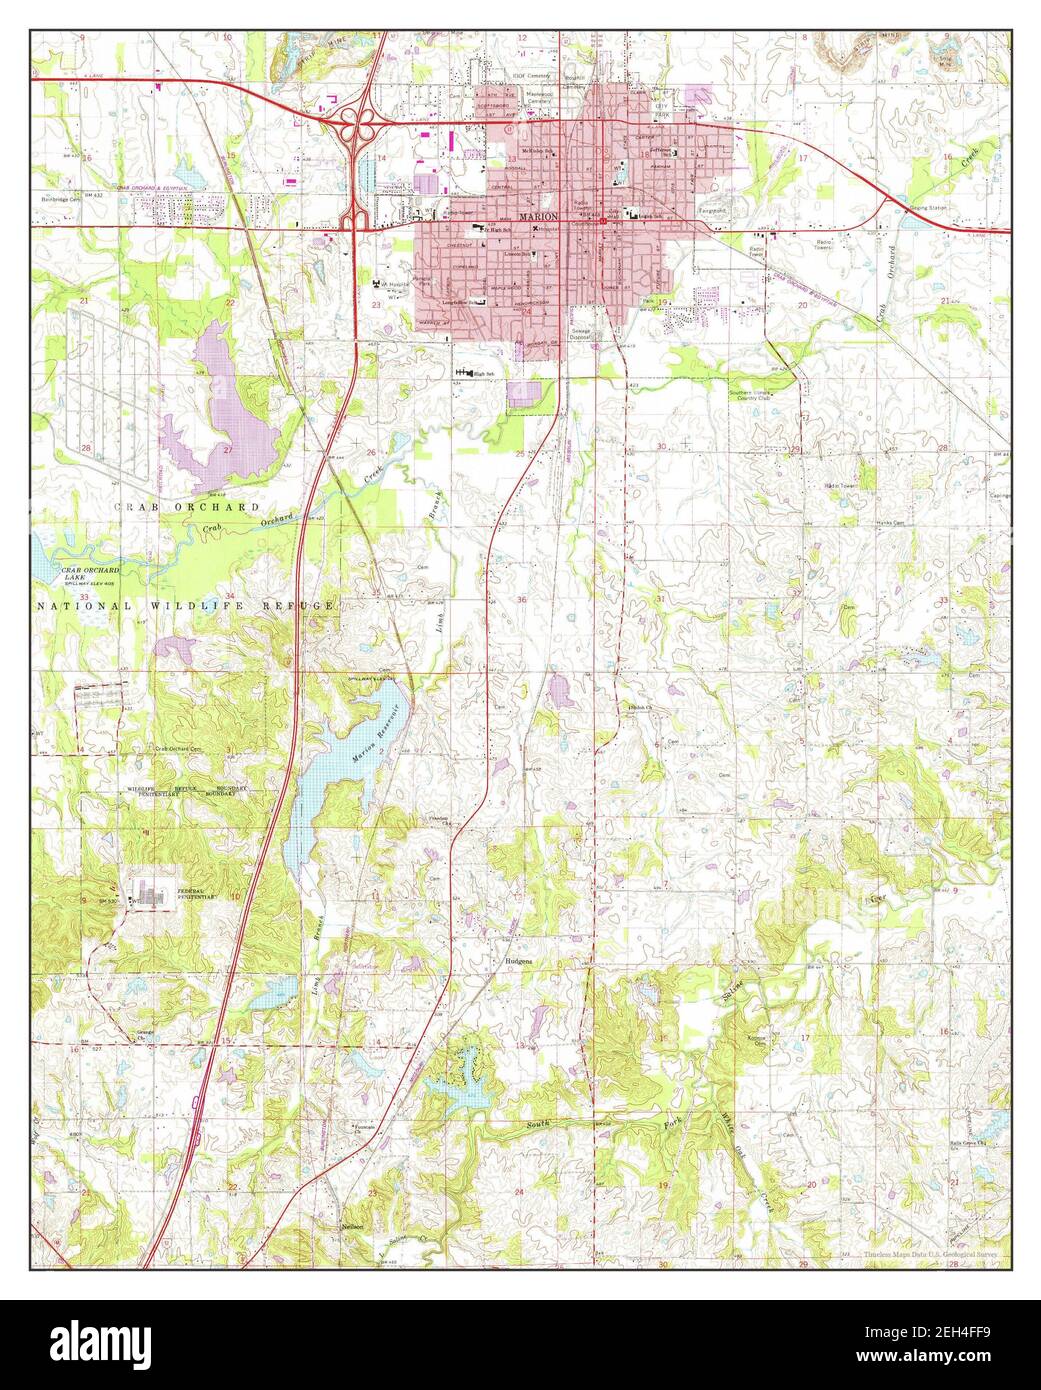 Marion, Illinois, map 1966, 1:24000, United States of America by Timeless Maps, data U.S. Geological Survey Stock Photo